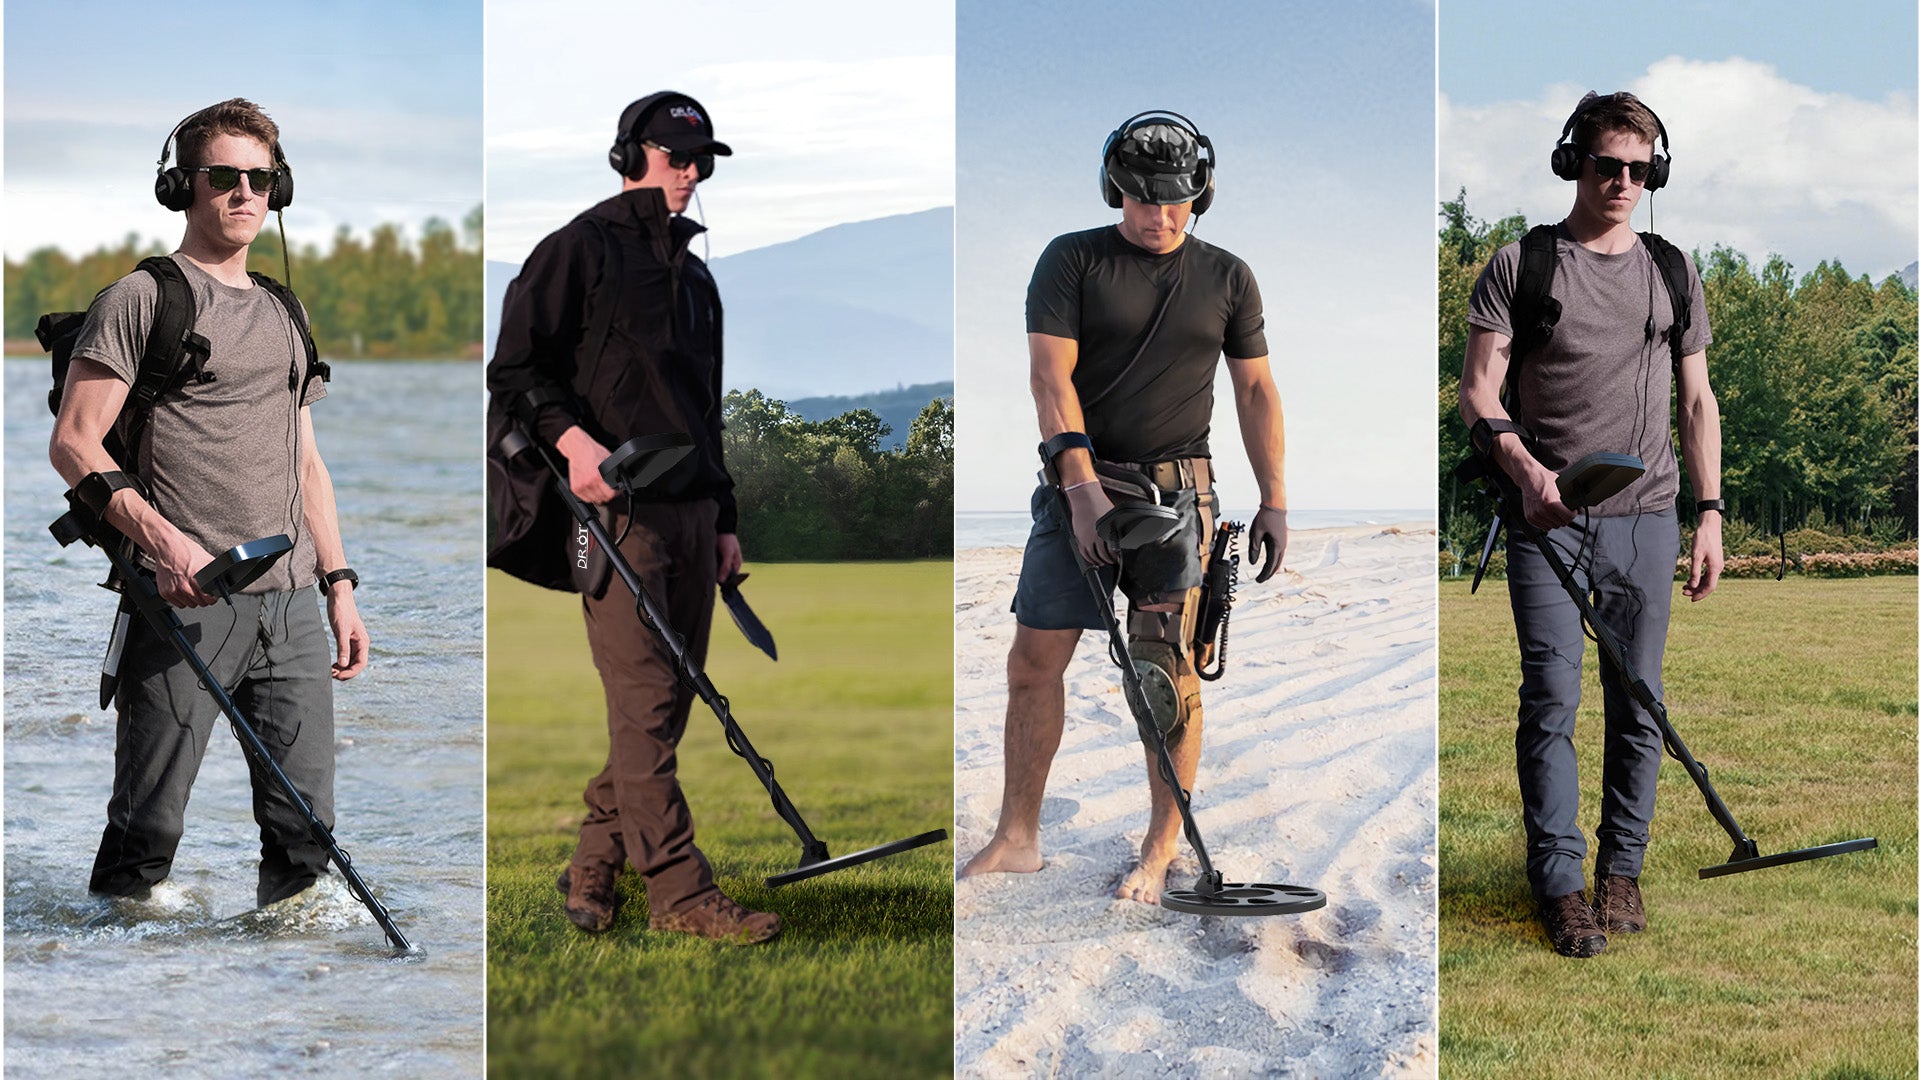 Using a metal detector in different terrains